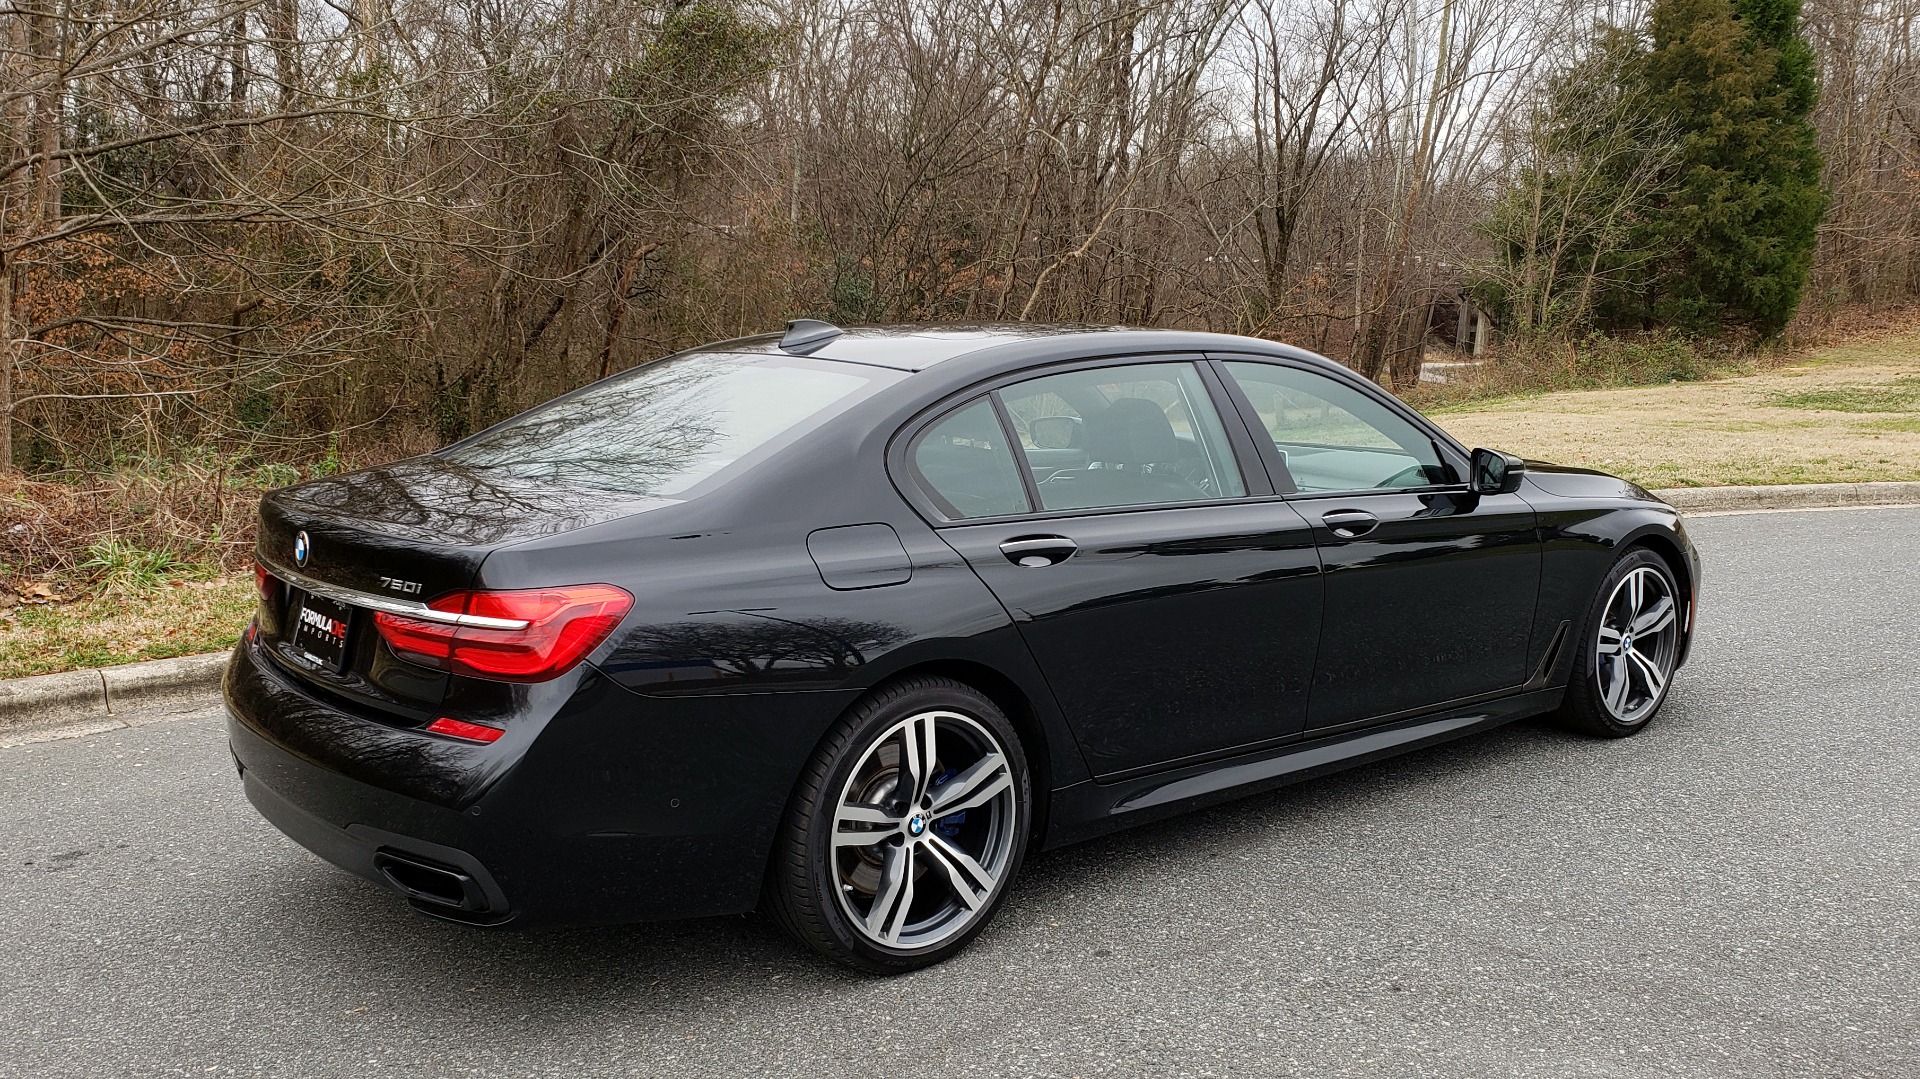 Used 2017 BMW 7 SERIES 750i M-SPORT / AUTOBAHN / EXEC / DRVR ASST PLUS II / CLD WTHR for sale Sold at Formula Imports in Charlotte NC 28227 6